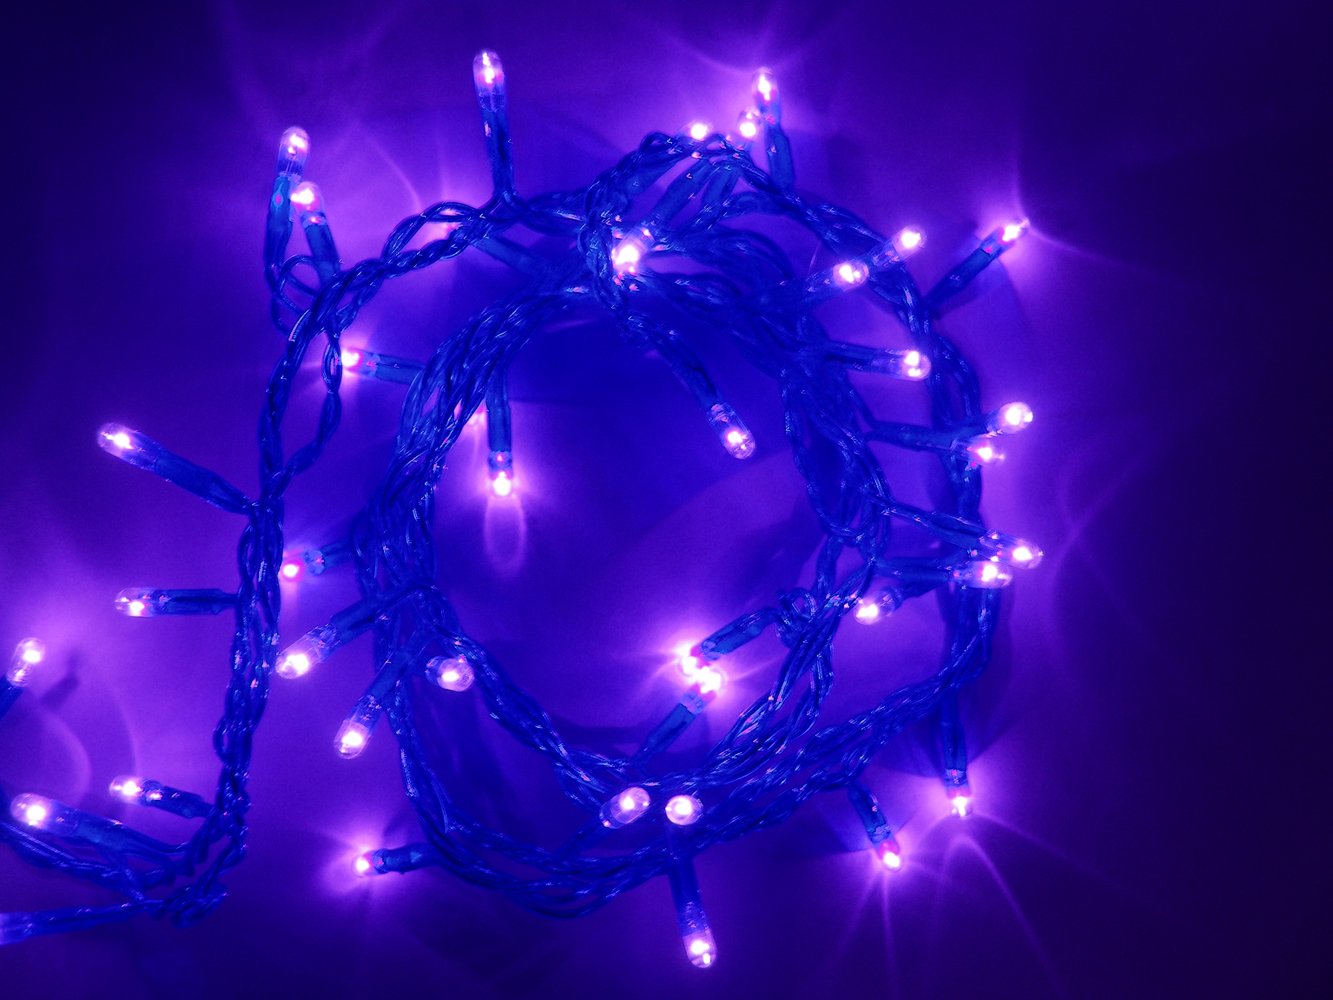 purple light with white bulbs in the middle